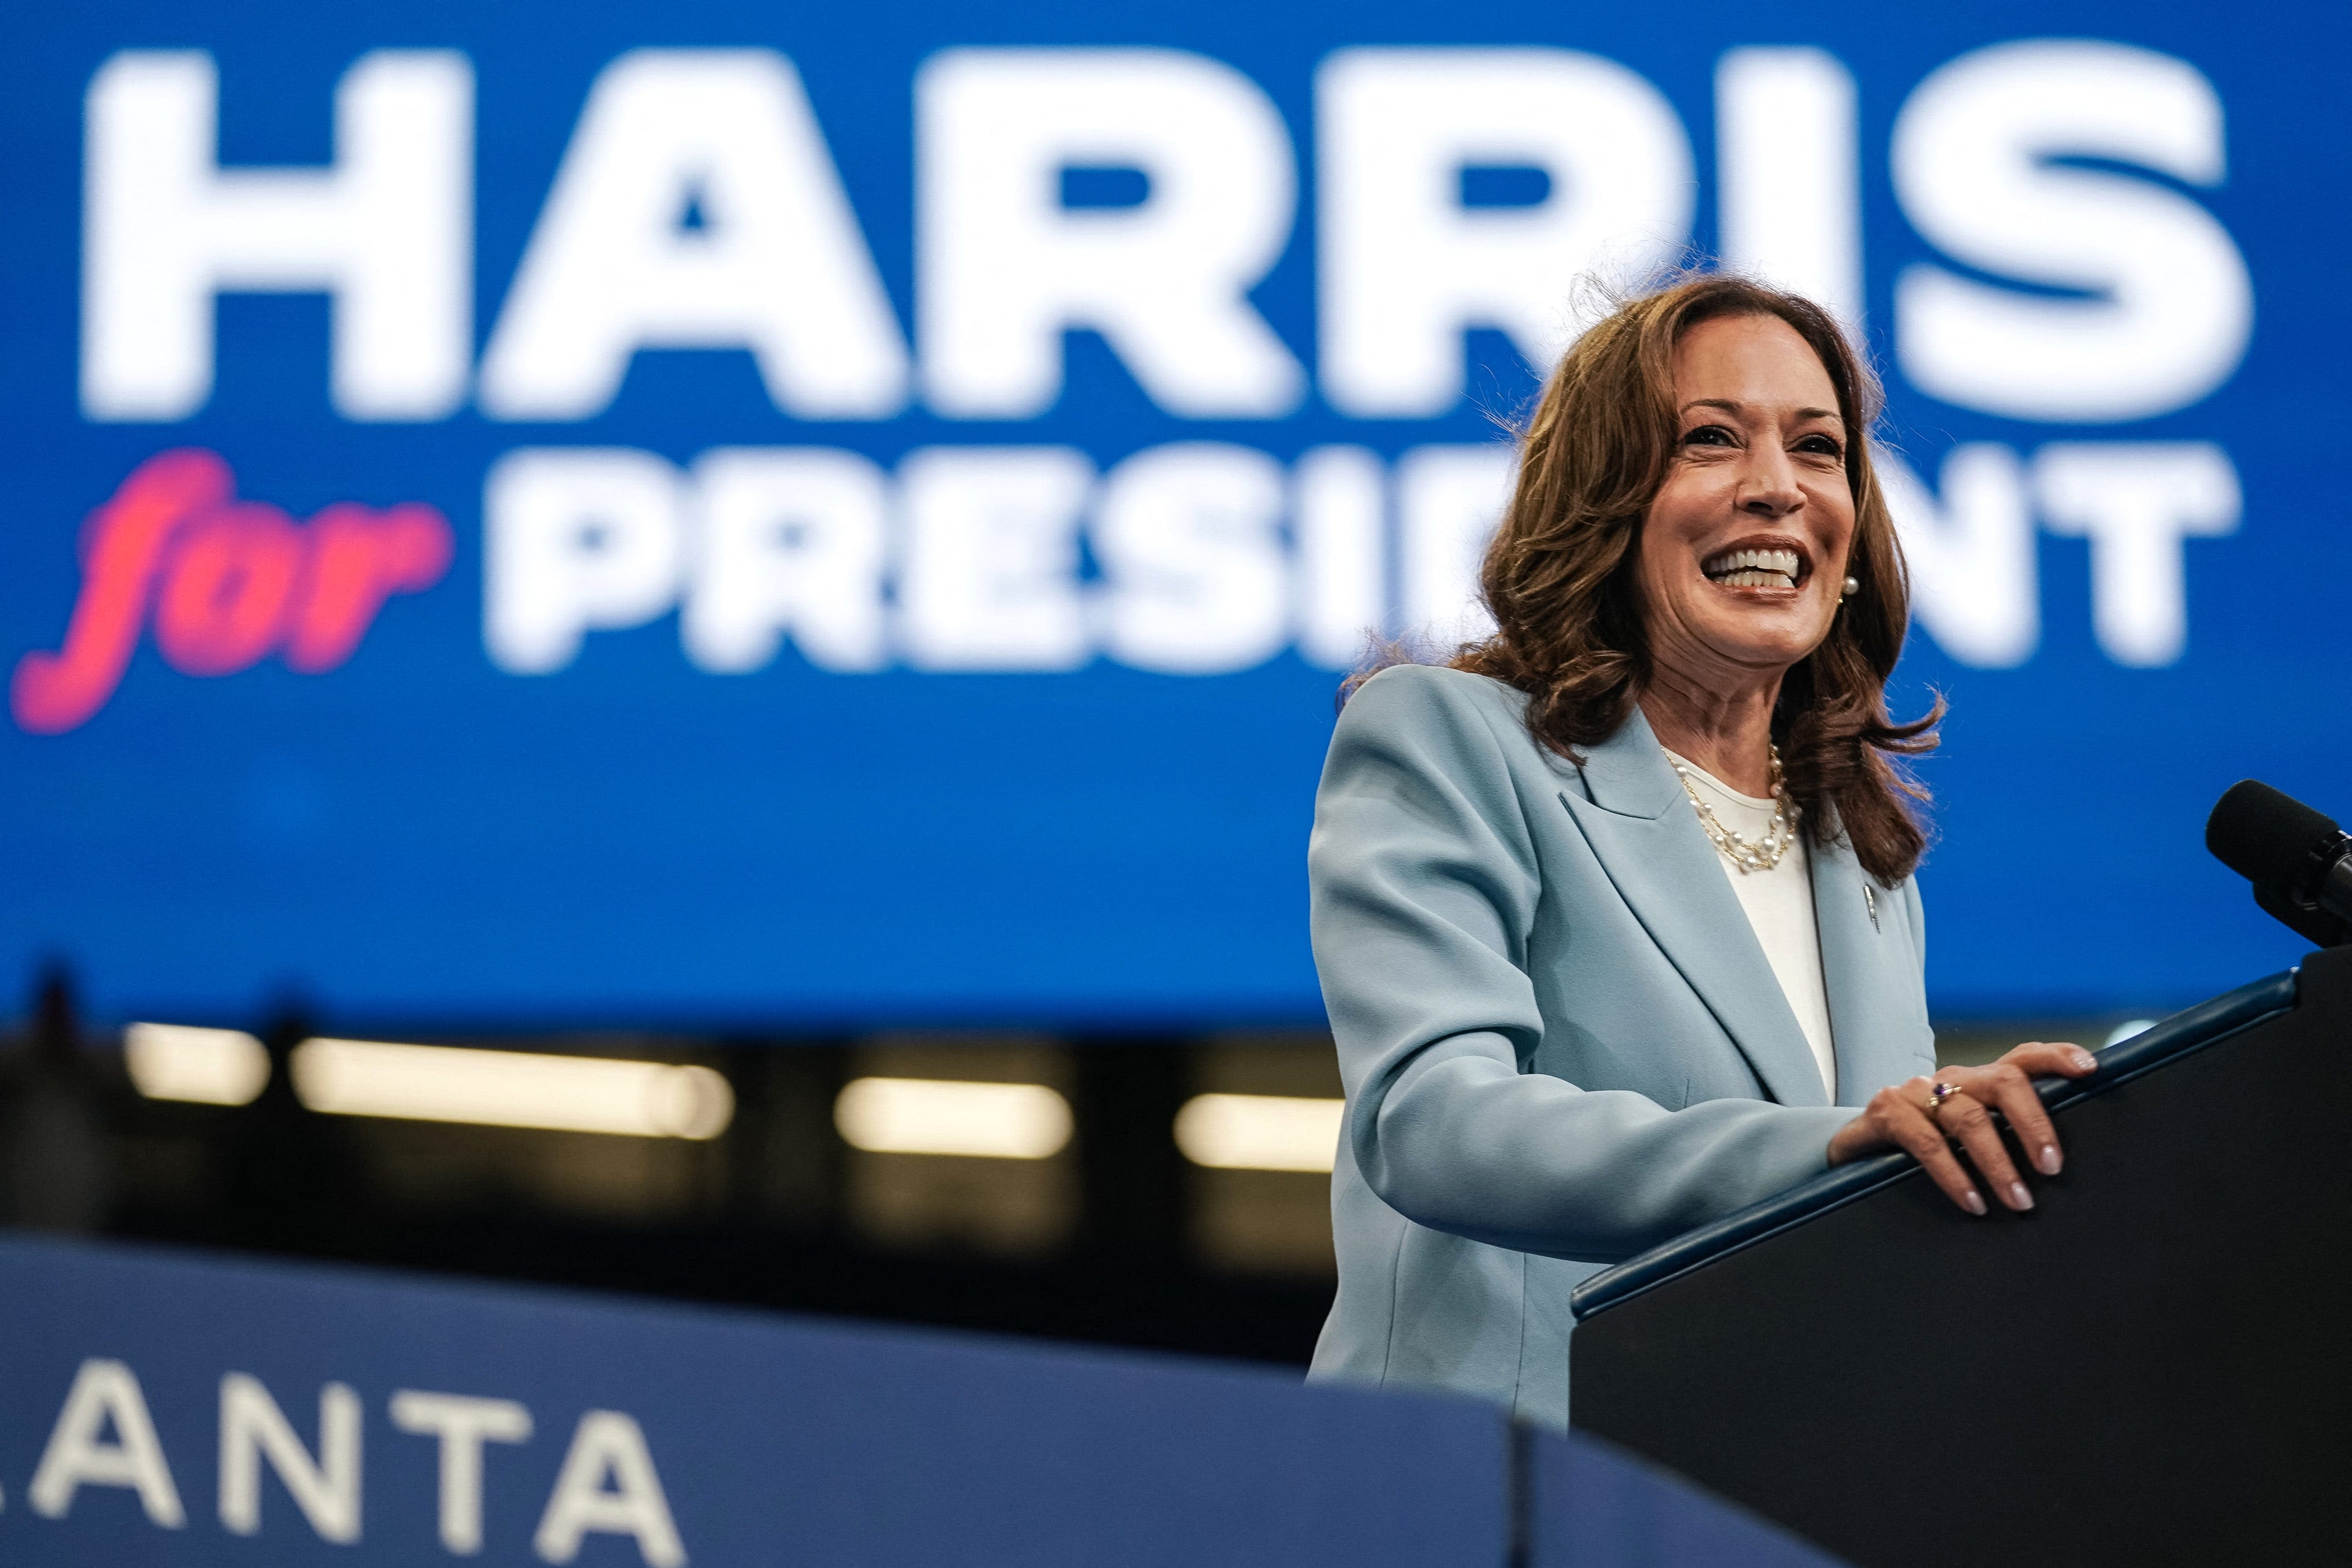 Kamala Harris' past is going under a microscope. PA shows how MAGA may target her | Kelly